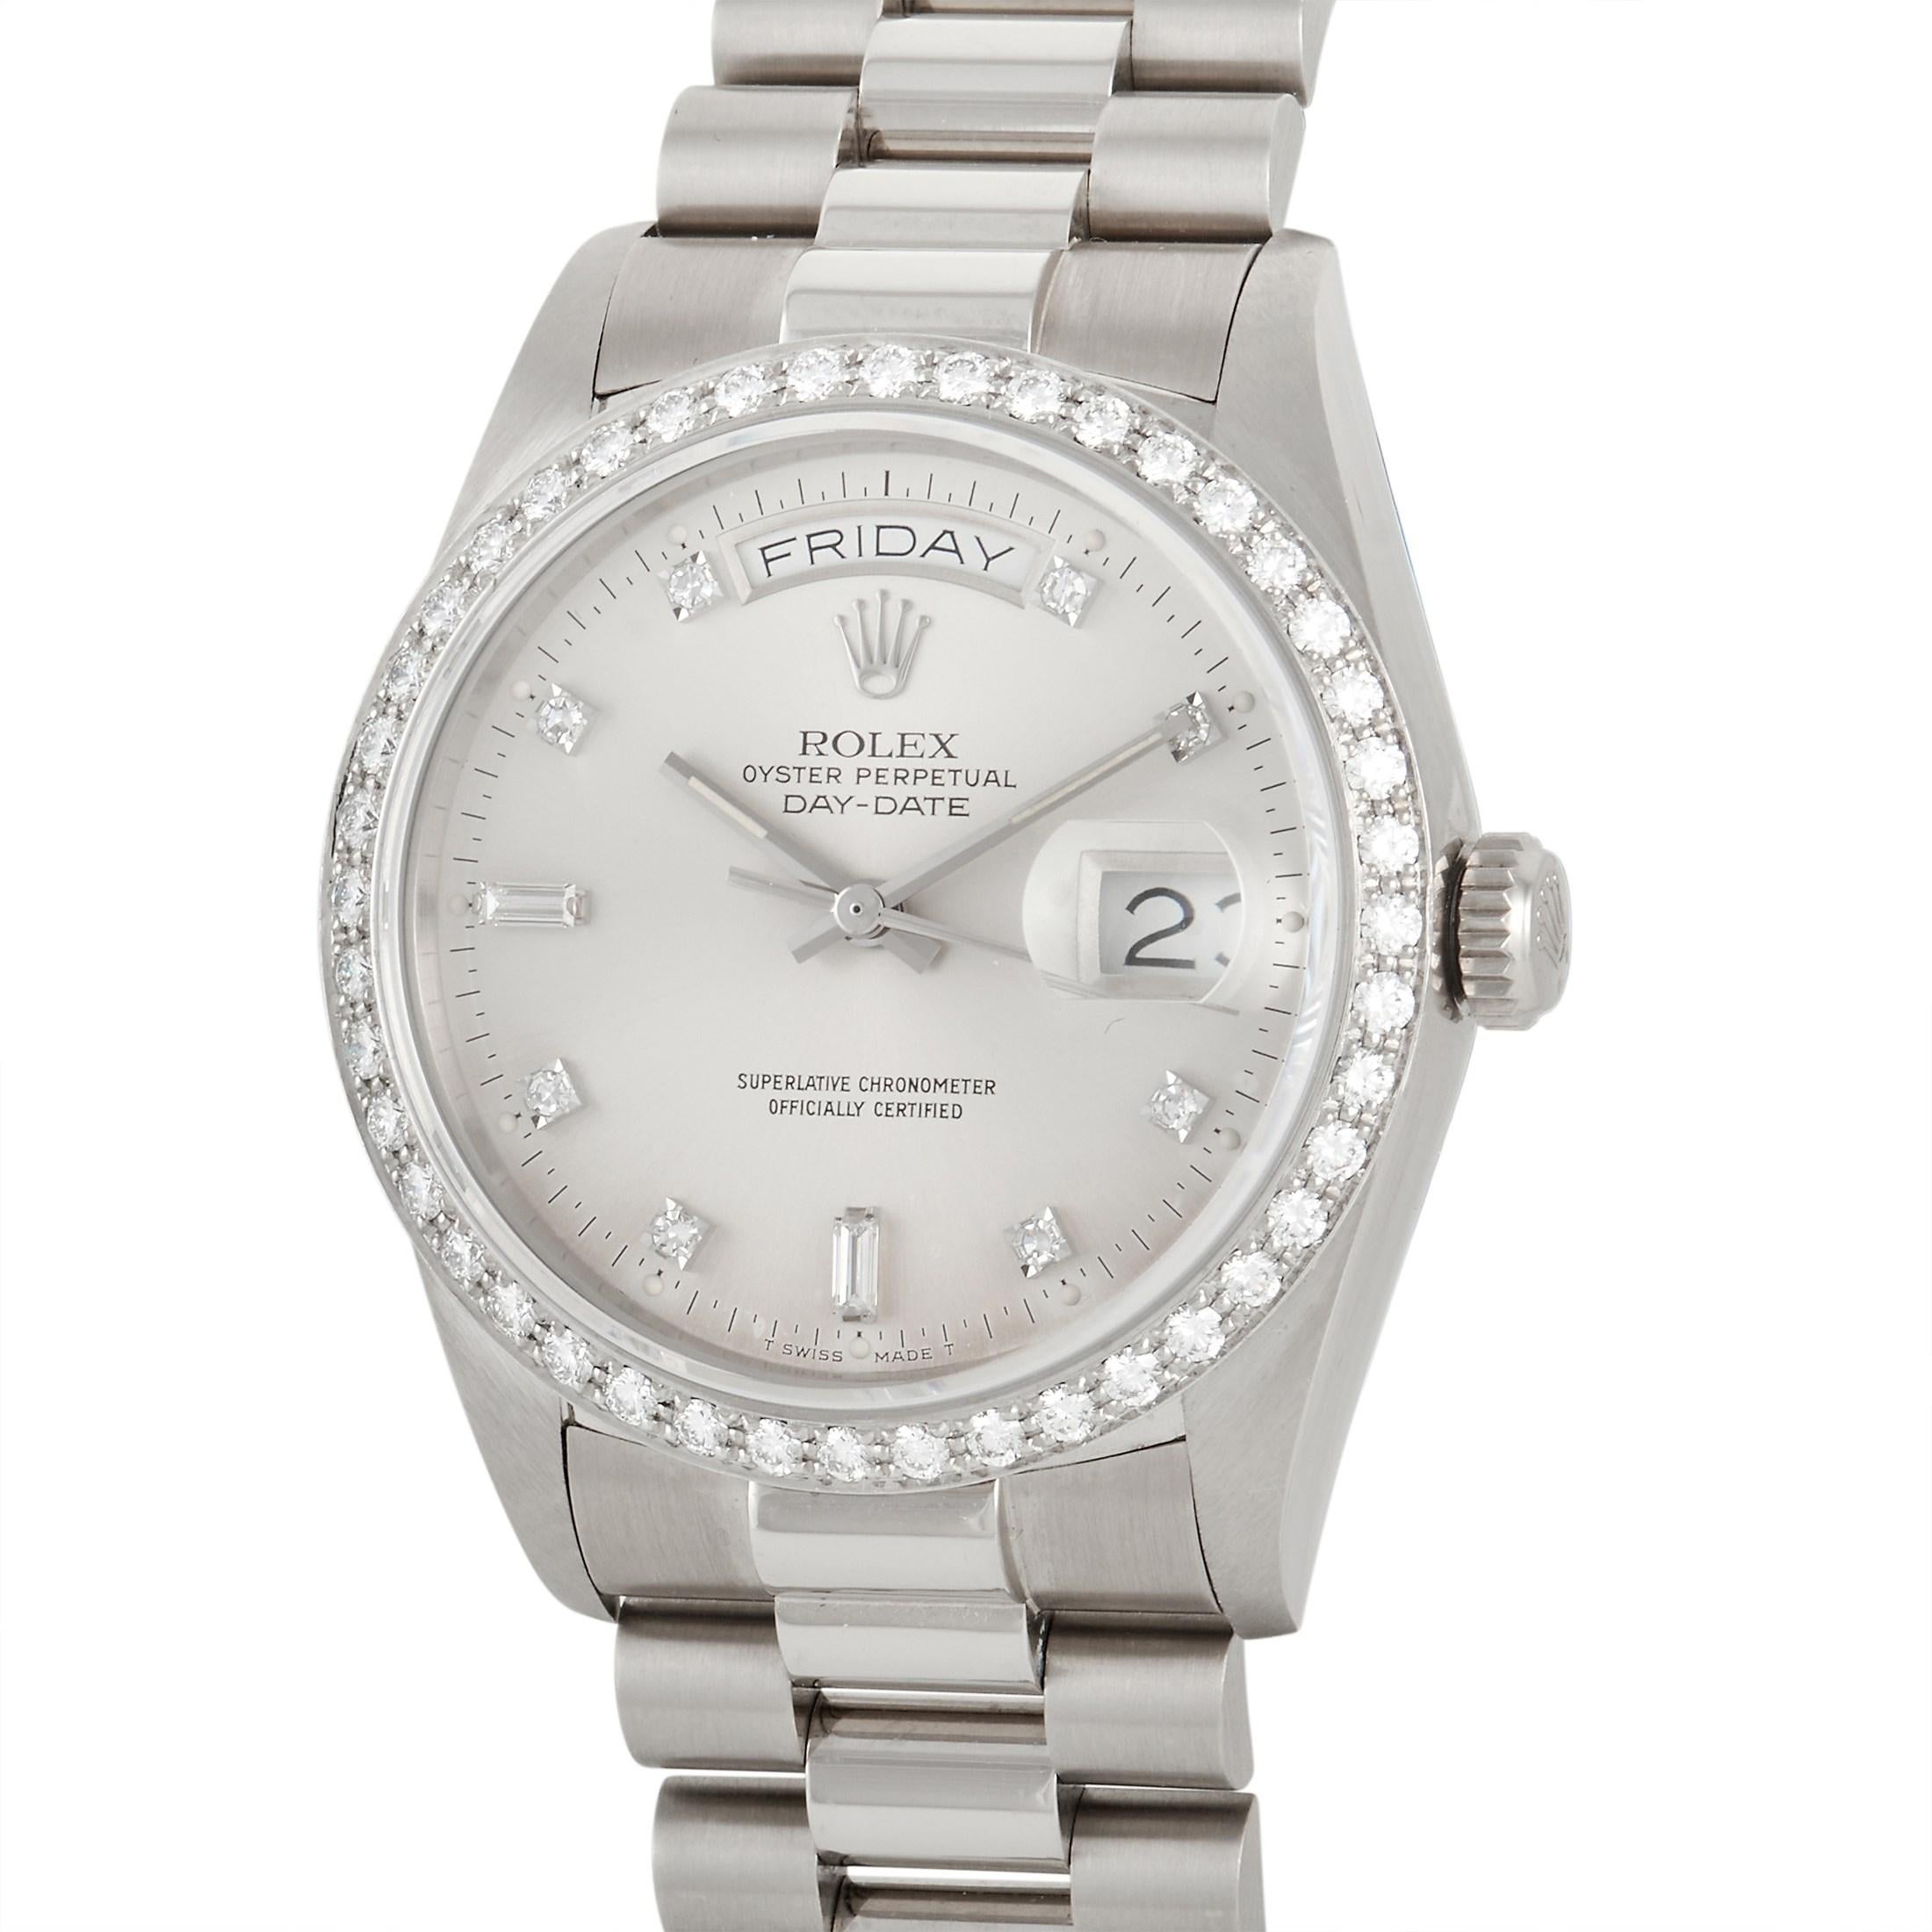 The Rolex Day-Date President Diamond Watch, reference number 18049, is breathtaking in its craftsmanship. 

This impeccable timepiece includes an 18K white gold 36mm case, an 18K white gold president bracelet, and a fixed 18K white gold diamond-set